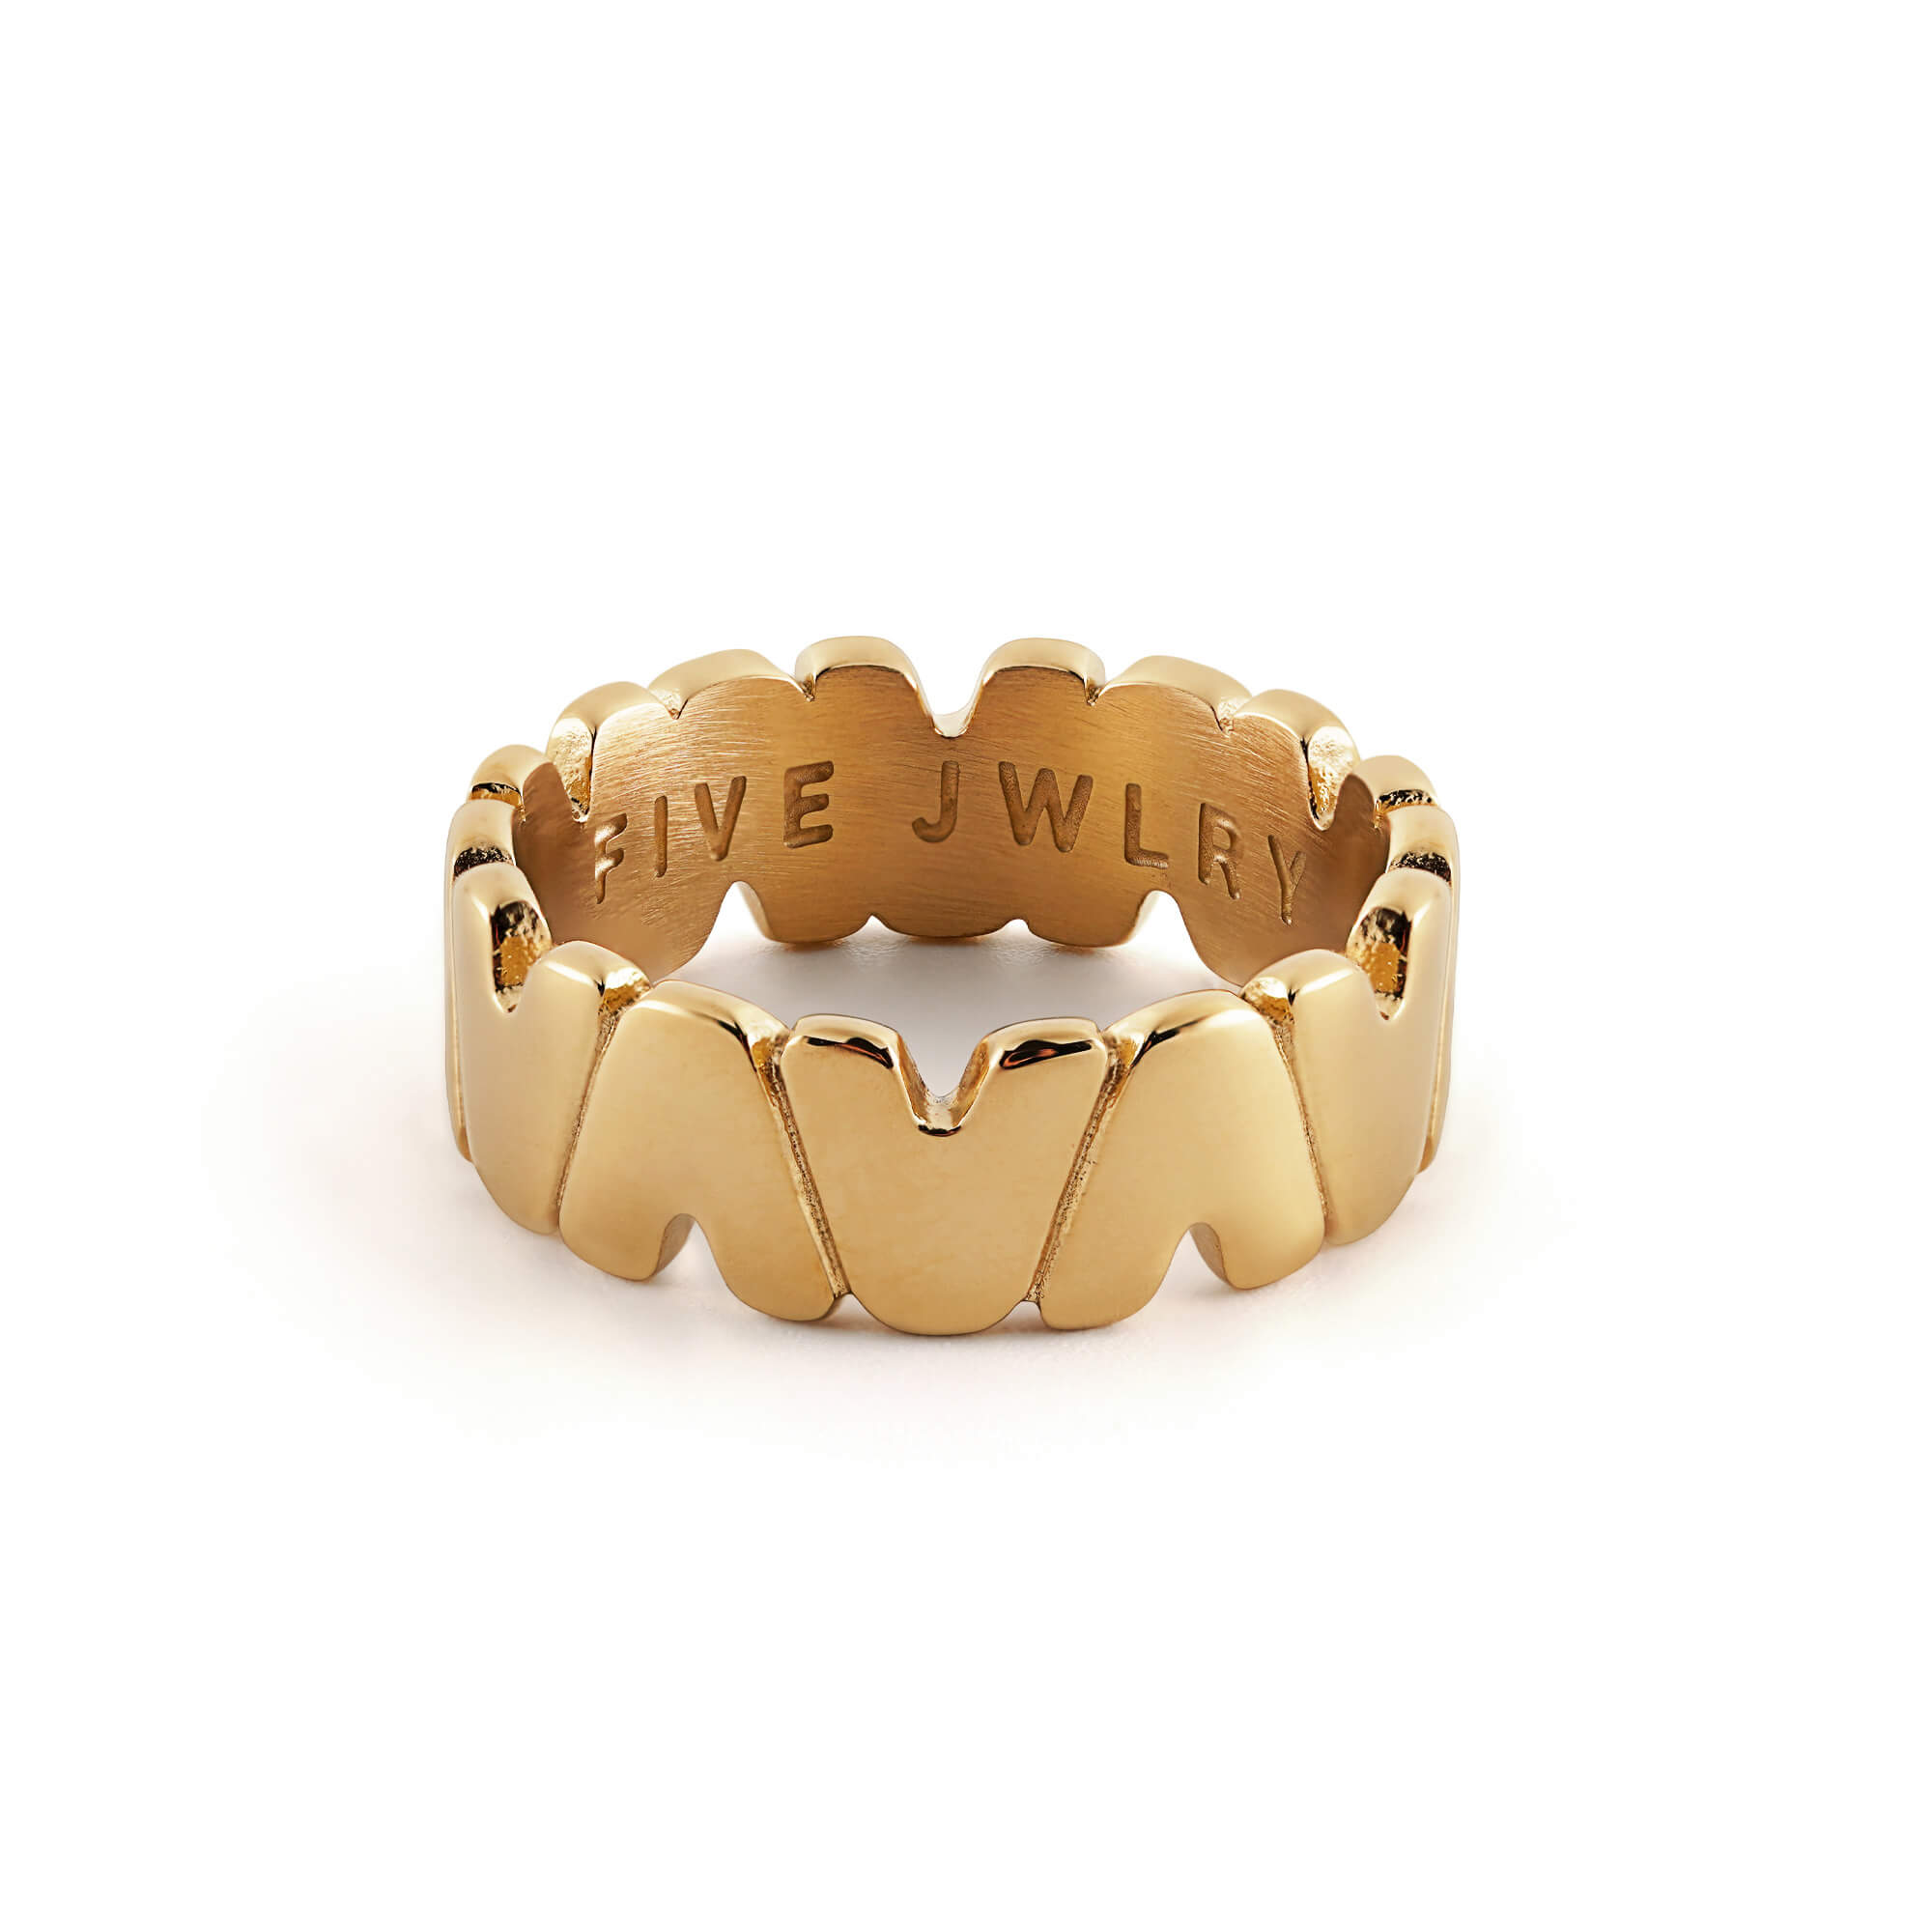 SAINQ women's ring by Five Jwlry, designed in 14k gold and uniquely shaped using the Roman numeral 'V' for five. Made from water-resistant 316L stainless steel. Hypoallergenic with a 2-year warranty.